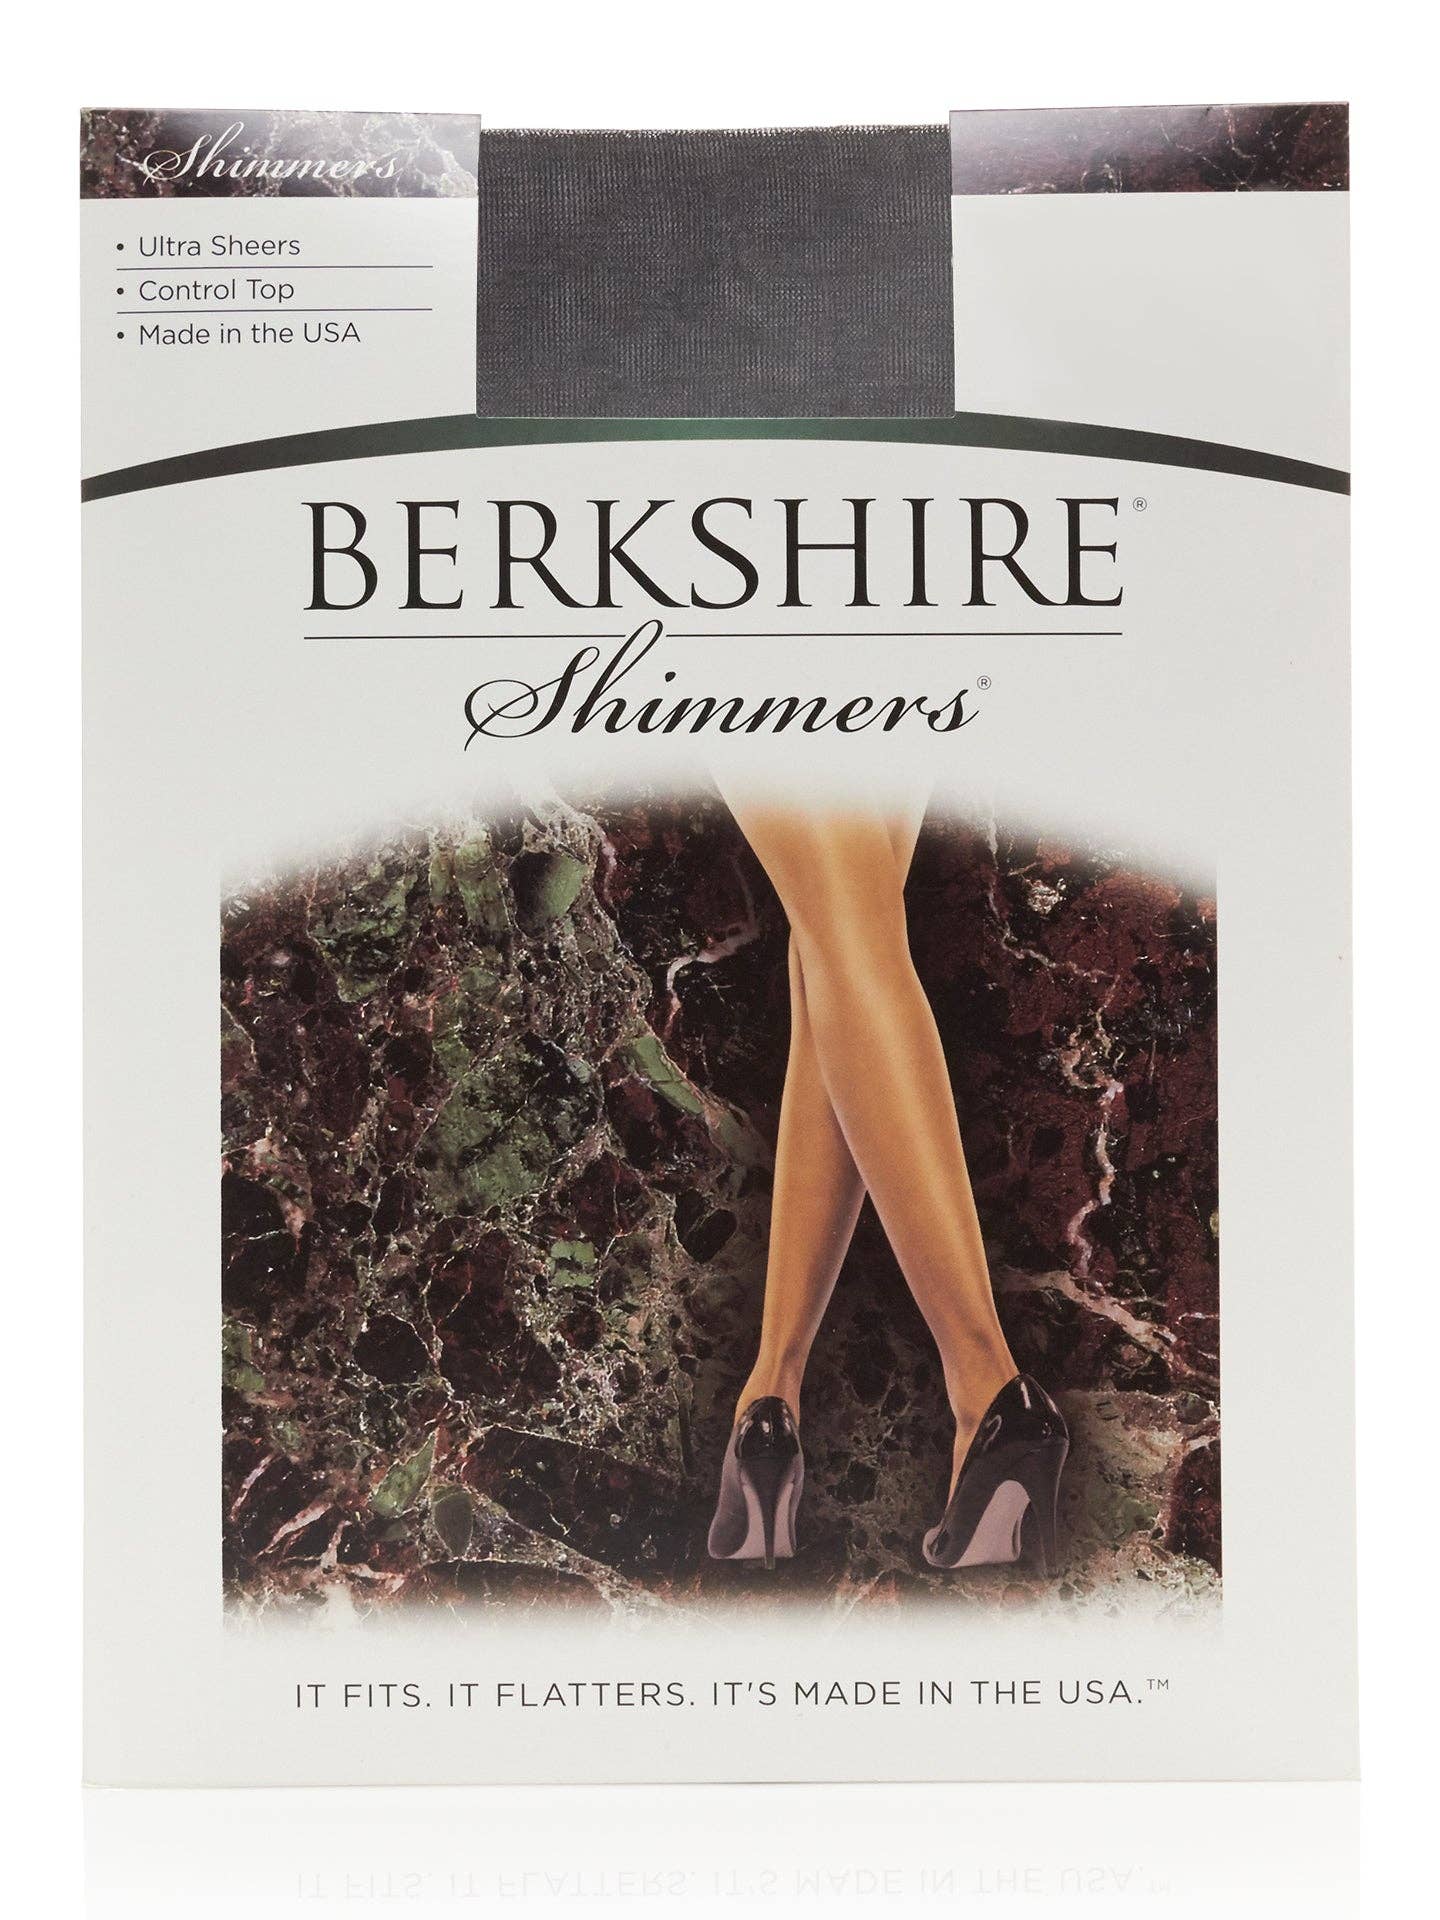 Shimmers Ultra Sheer Control Top Pantyhose - Black / 1